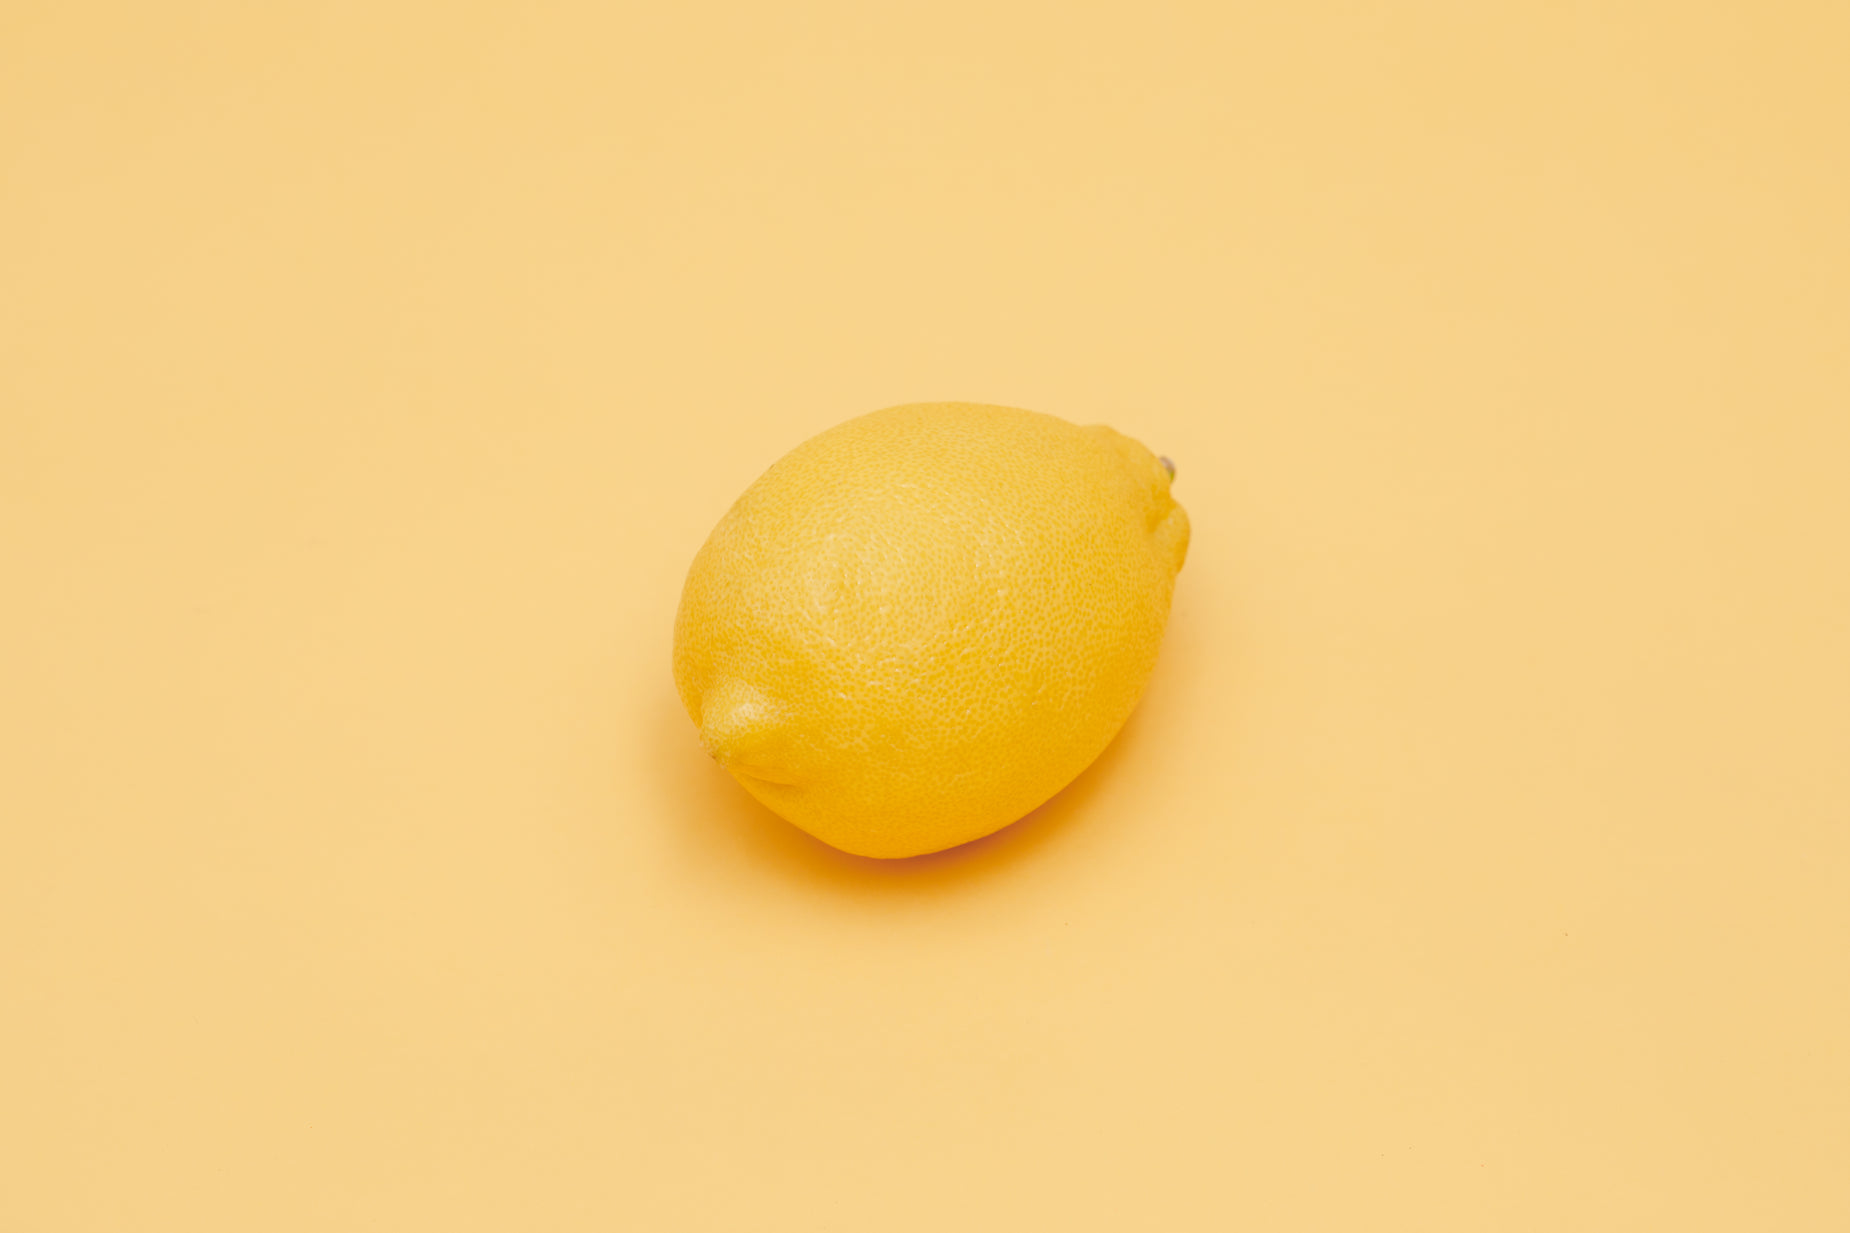 a lemon on a yellow background looking up